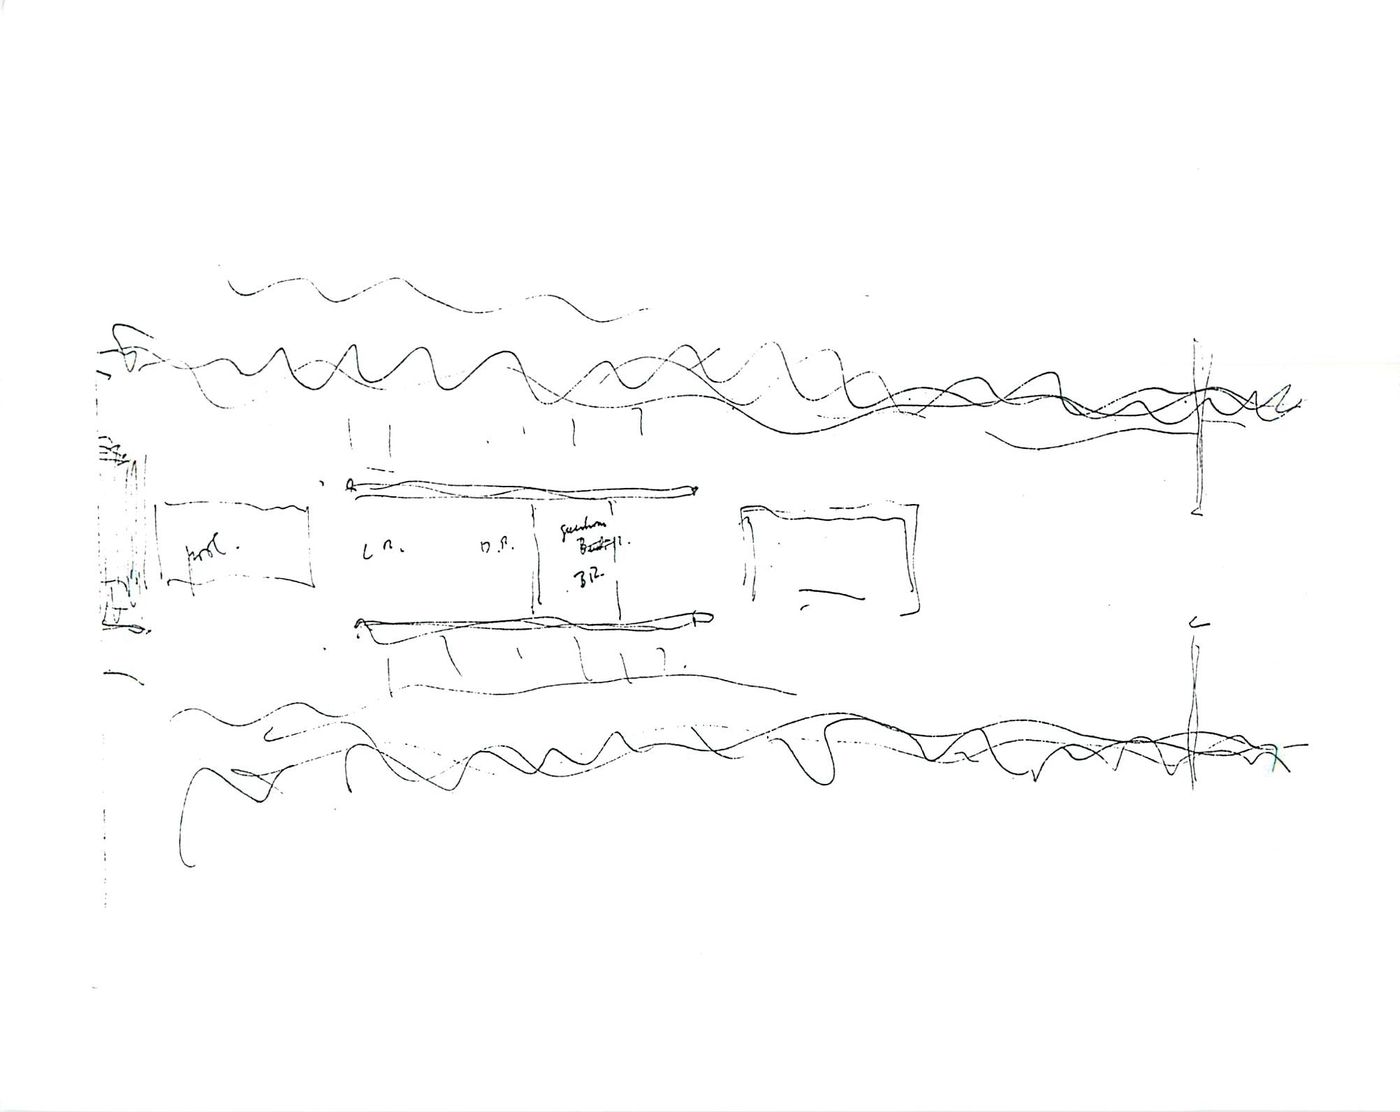 Conceptual sketch, site plan with house, Private Residence, Pacific North-West (also called "Bagley Wright House")